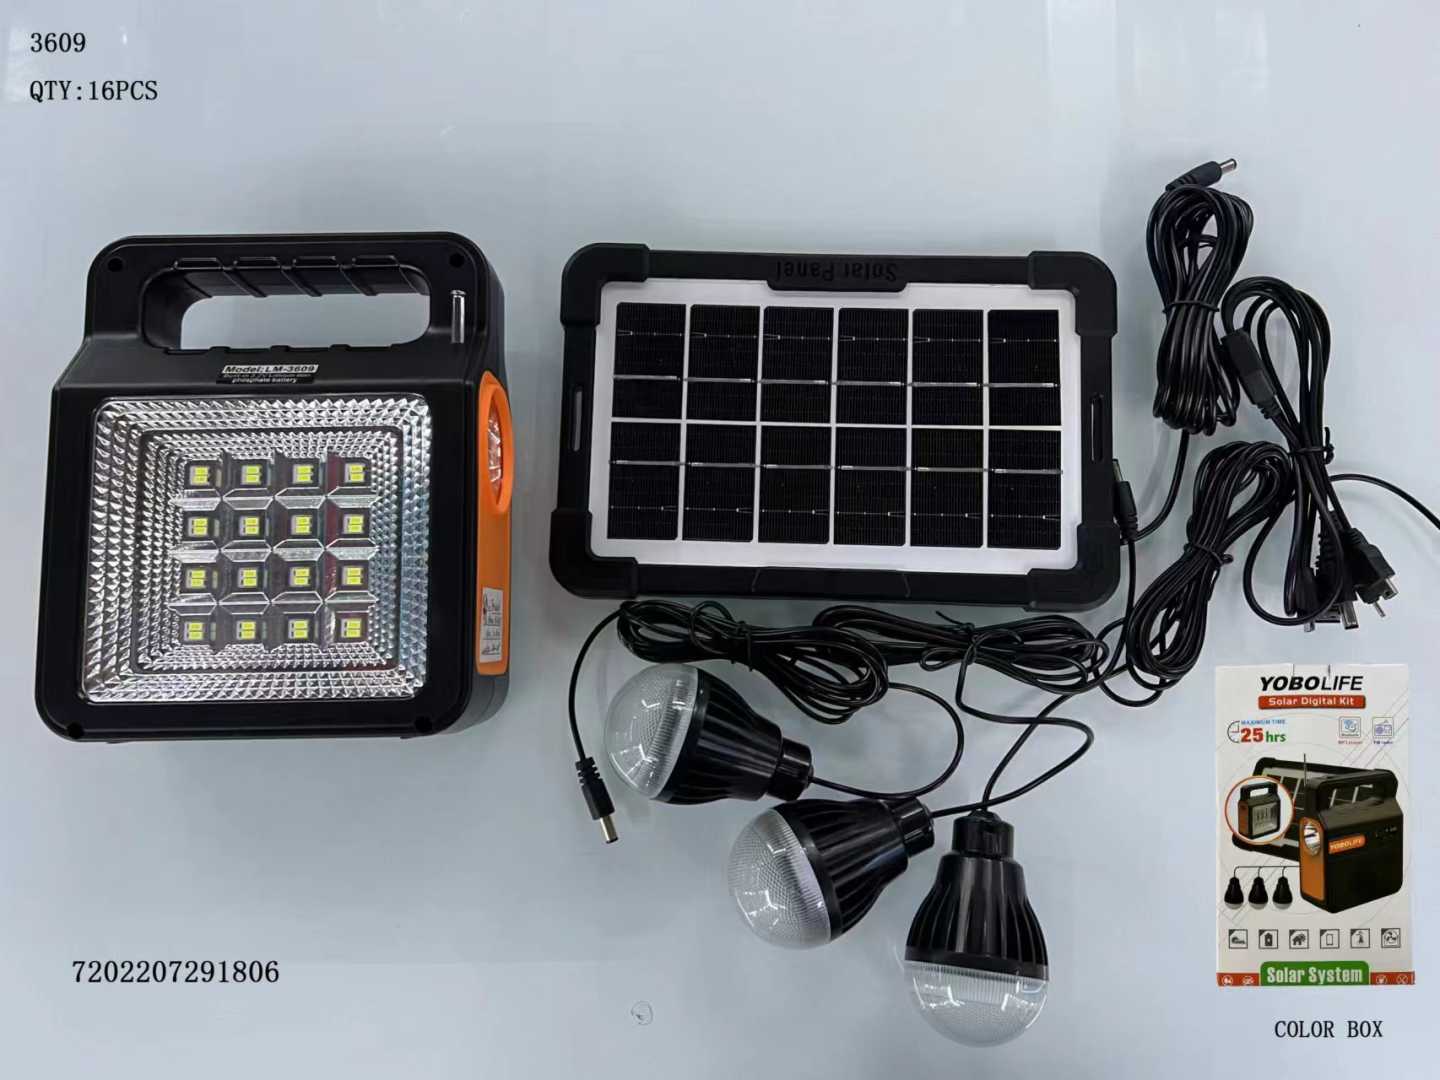 Rechargeable Solar Lighting System - 3609 - 291806